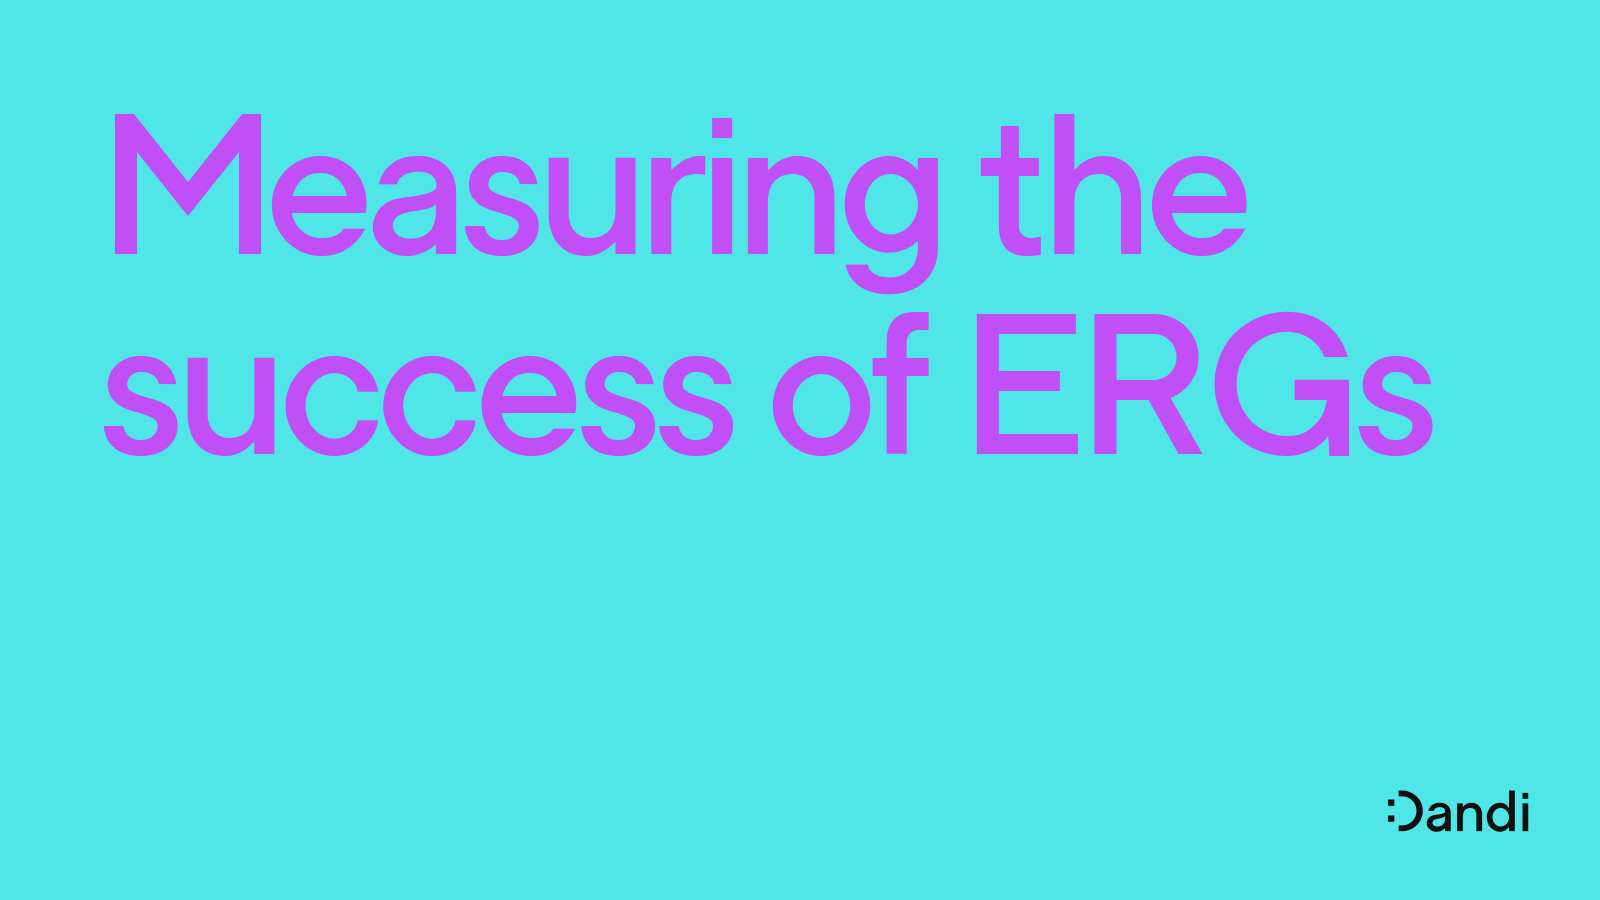 Text reads: Measuring the success of ERGs. The Dandi smiley logo is in the lower right corner.